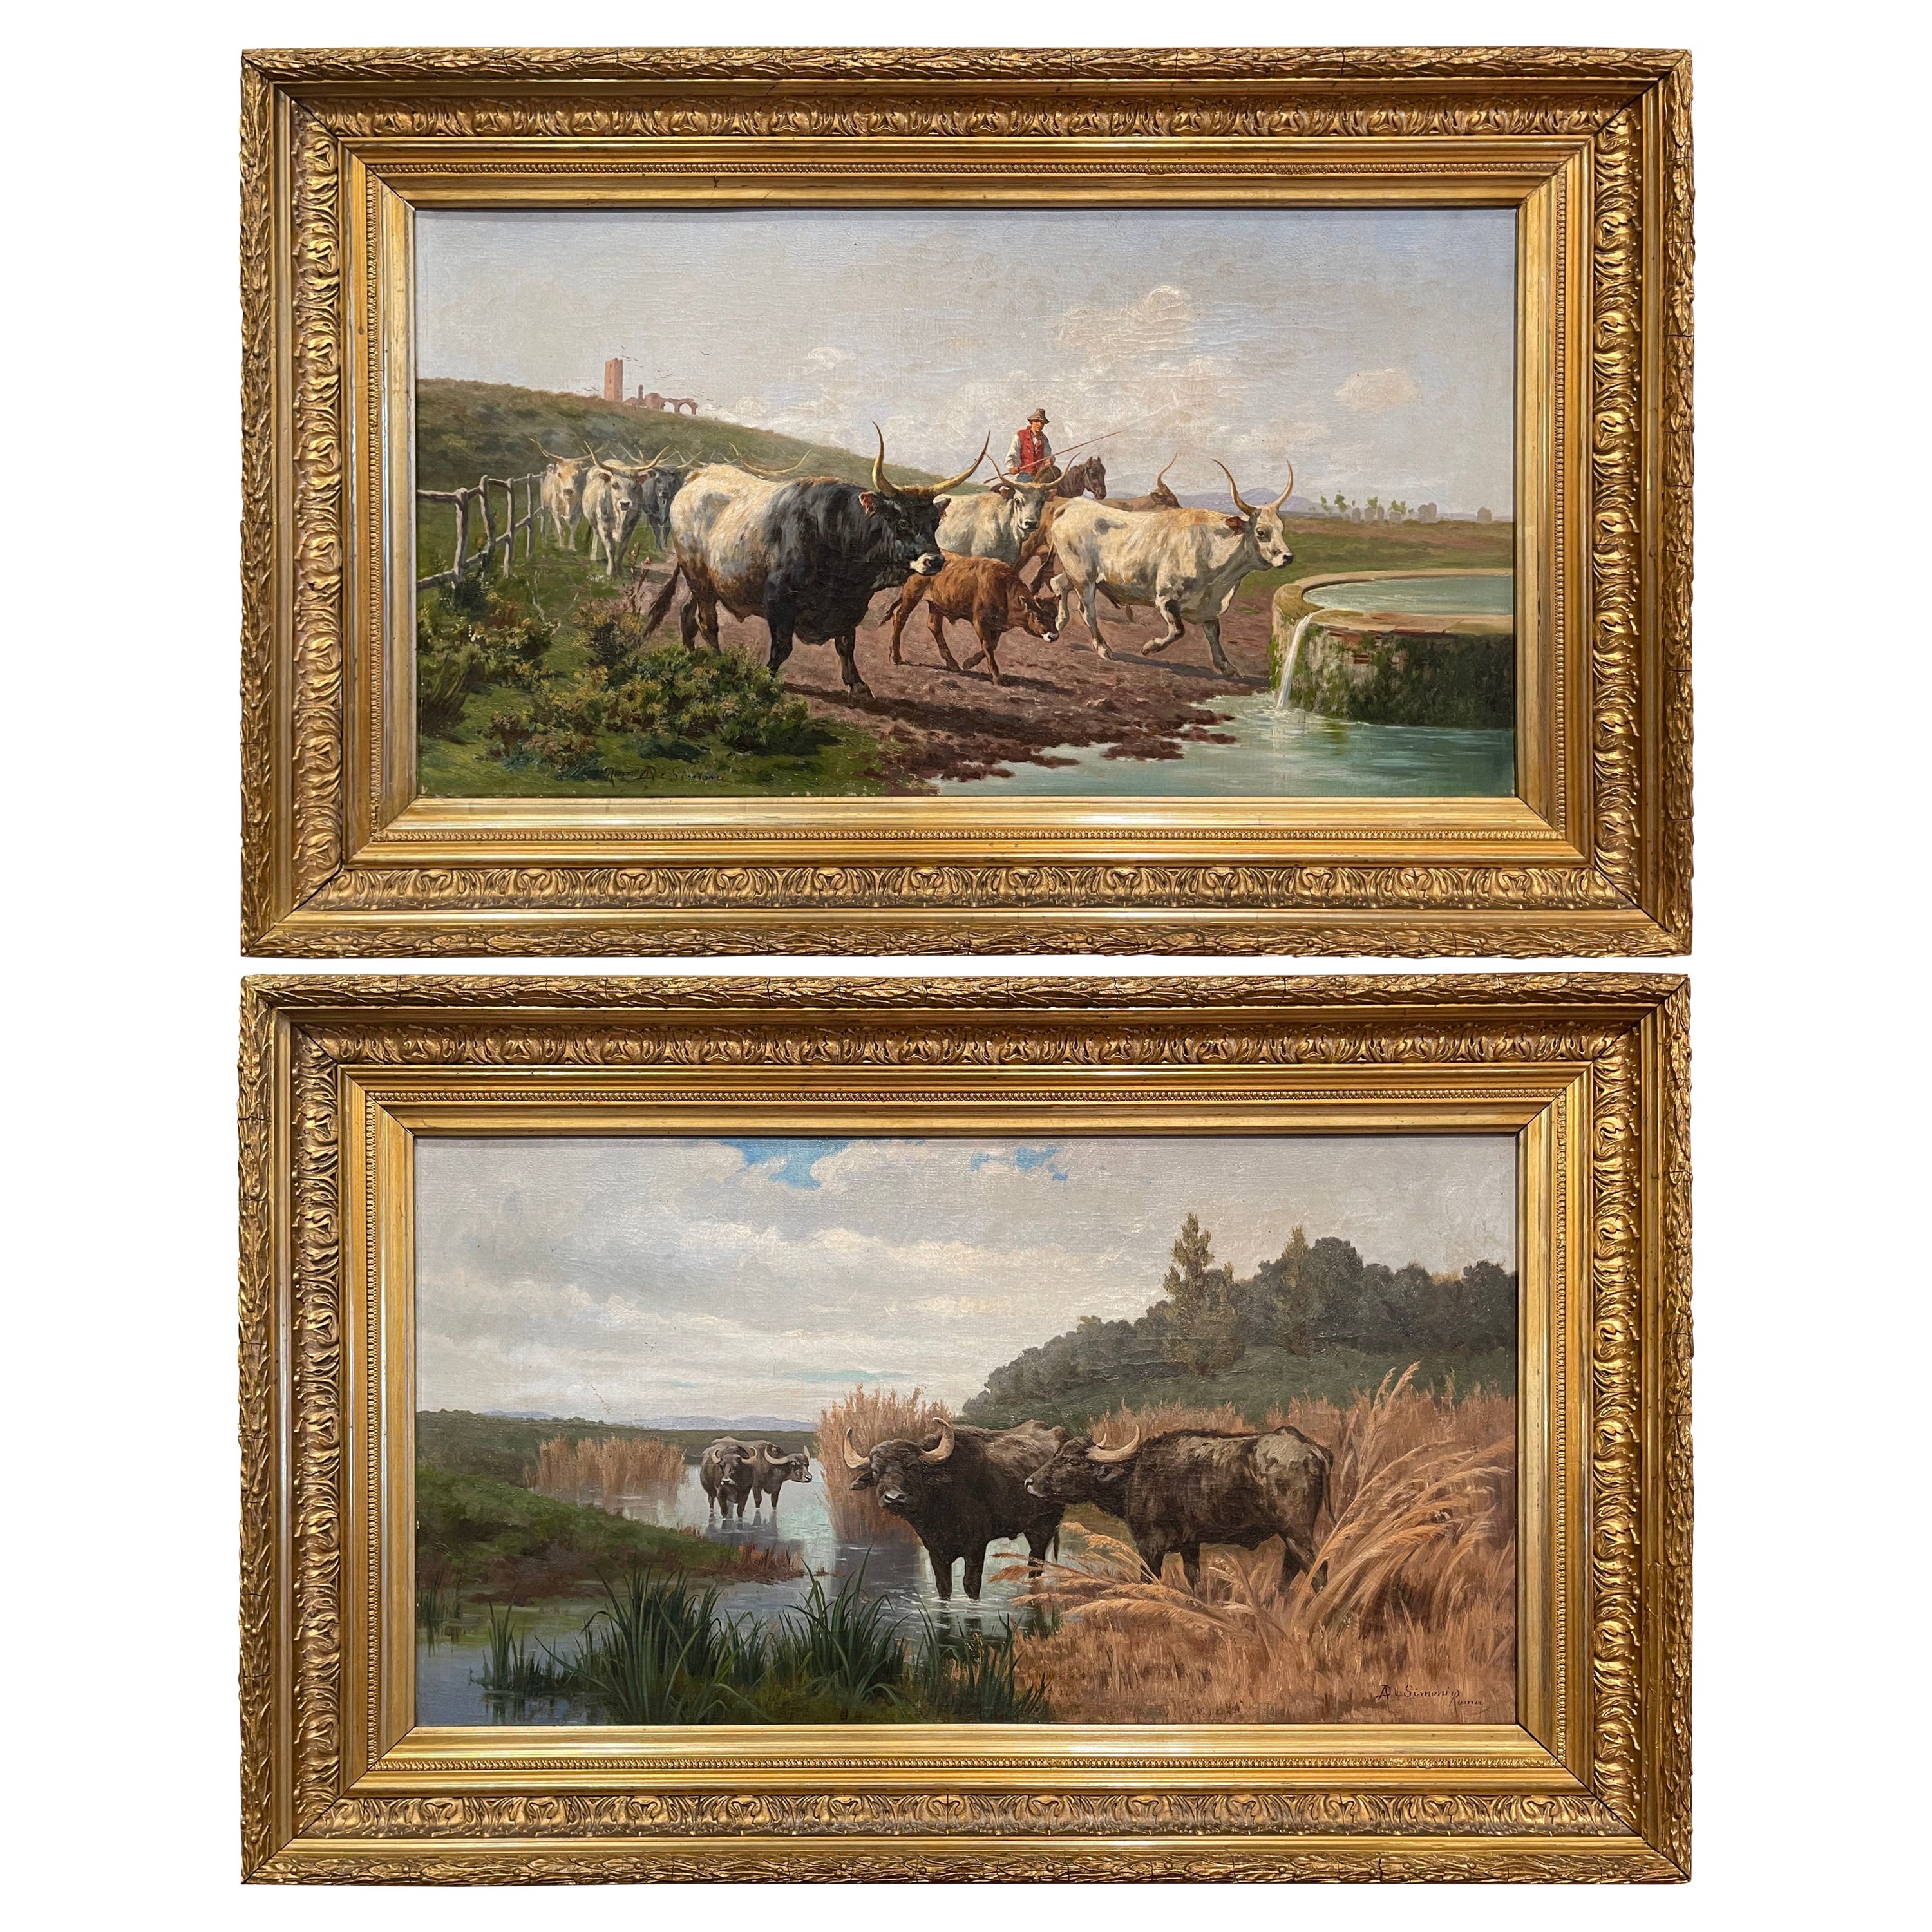 Pair of 19th Century Framed Oil on Canvas Cow Paintings Signed A. de Simoni